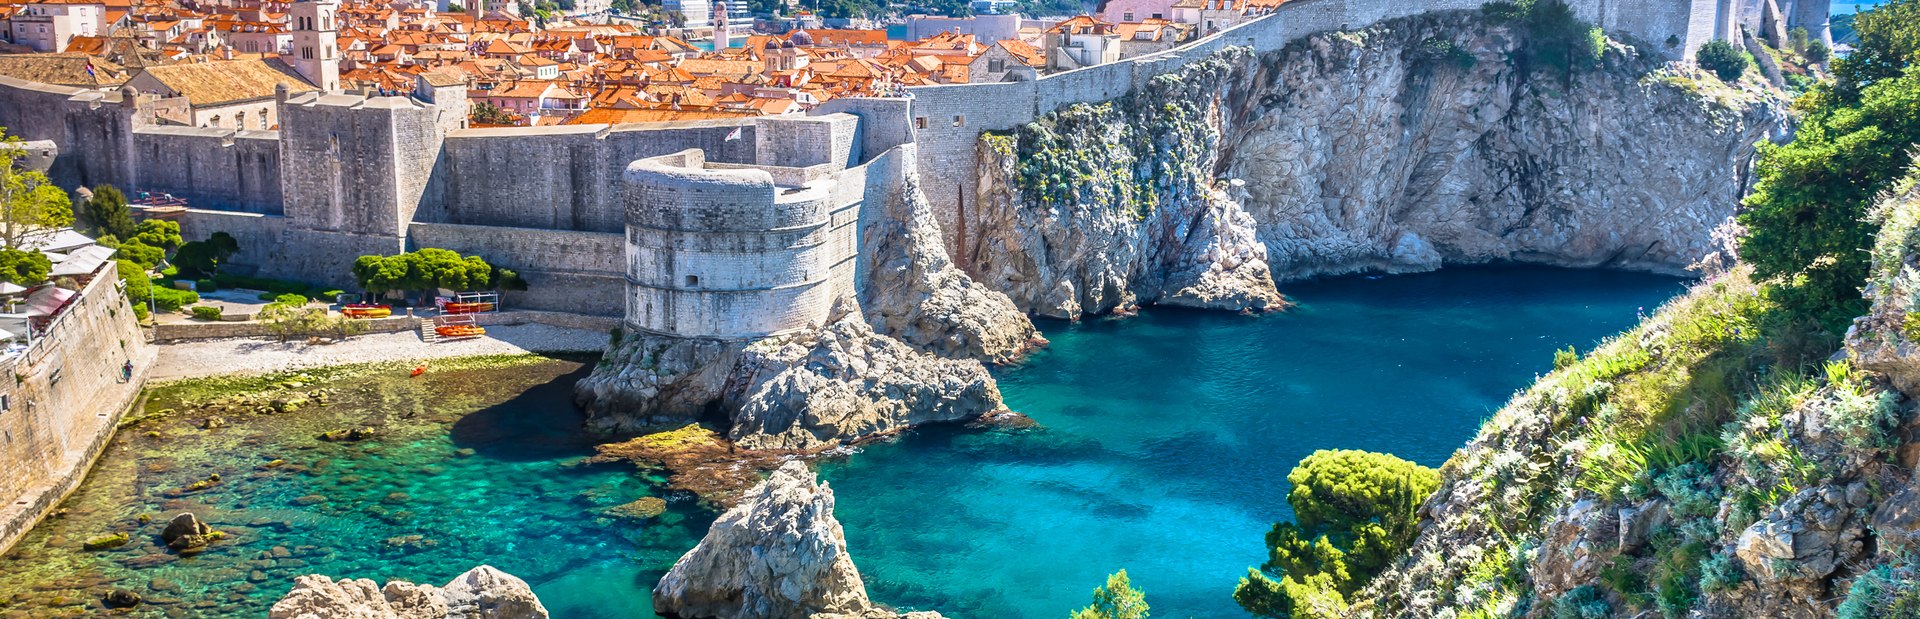 10 things to do on a yacht charter during the Dubrovnik Summer Festival